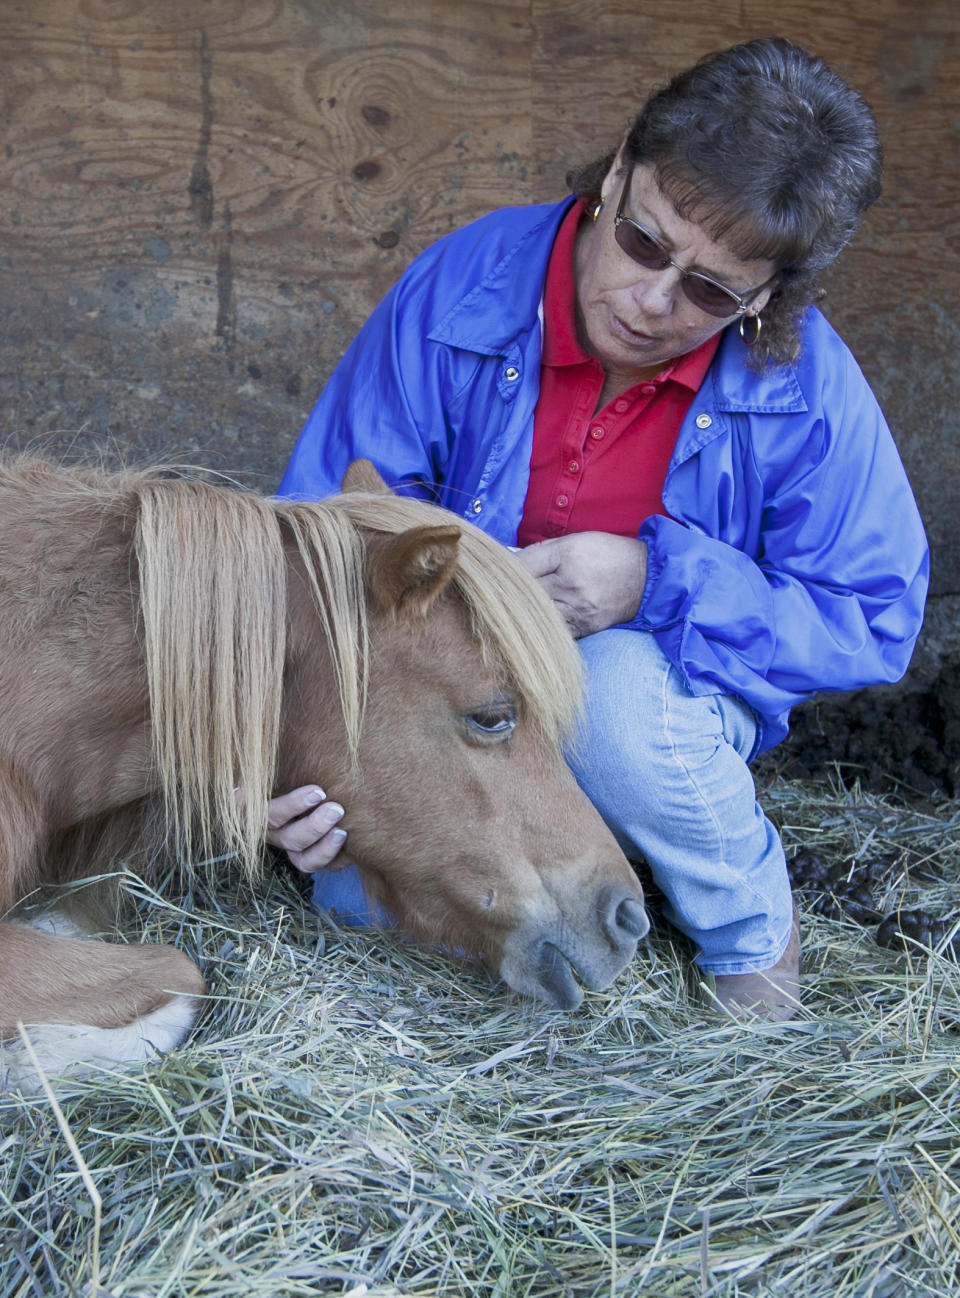 Genea Stoops who runs Hooves & Paws Rescue of the Heartland, tends to Buttercup, a twenty-year-old miniature horse she shelters in Glenwood, Iowa, Friday, Aug. 17, 2012. Because of drought, little but stubble is left on pastures, and hay prices have soared, forcing some owners who can no longer afford to feed their horses to abandon them on the doorstep of animal rescue operations such as the Stoops' .(AP Photo/Nati Harnik)